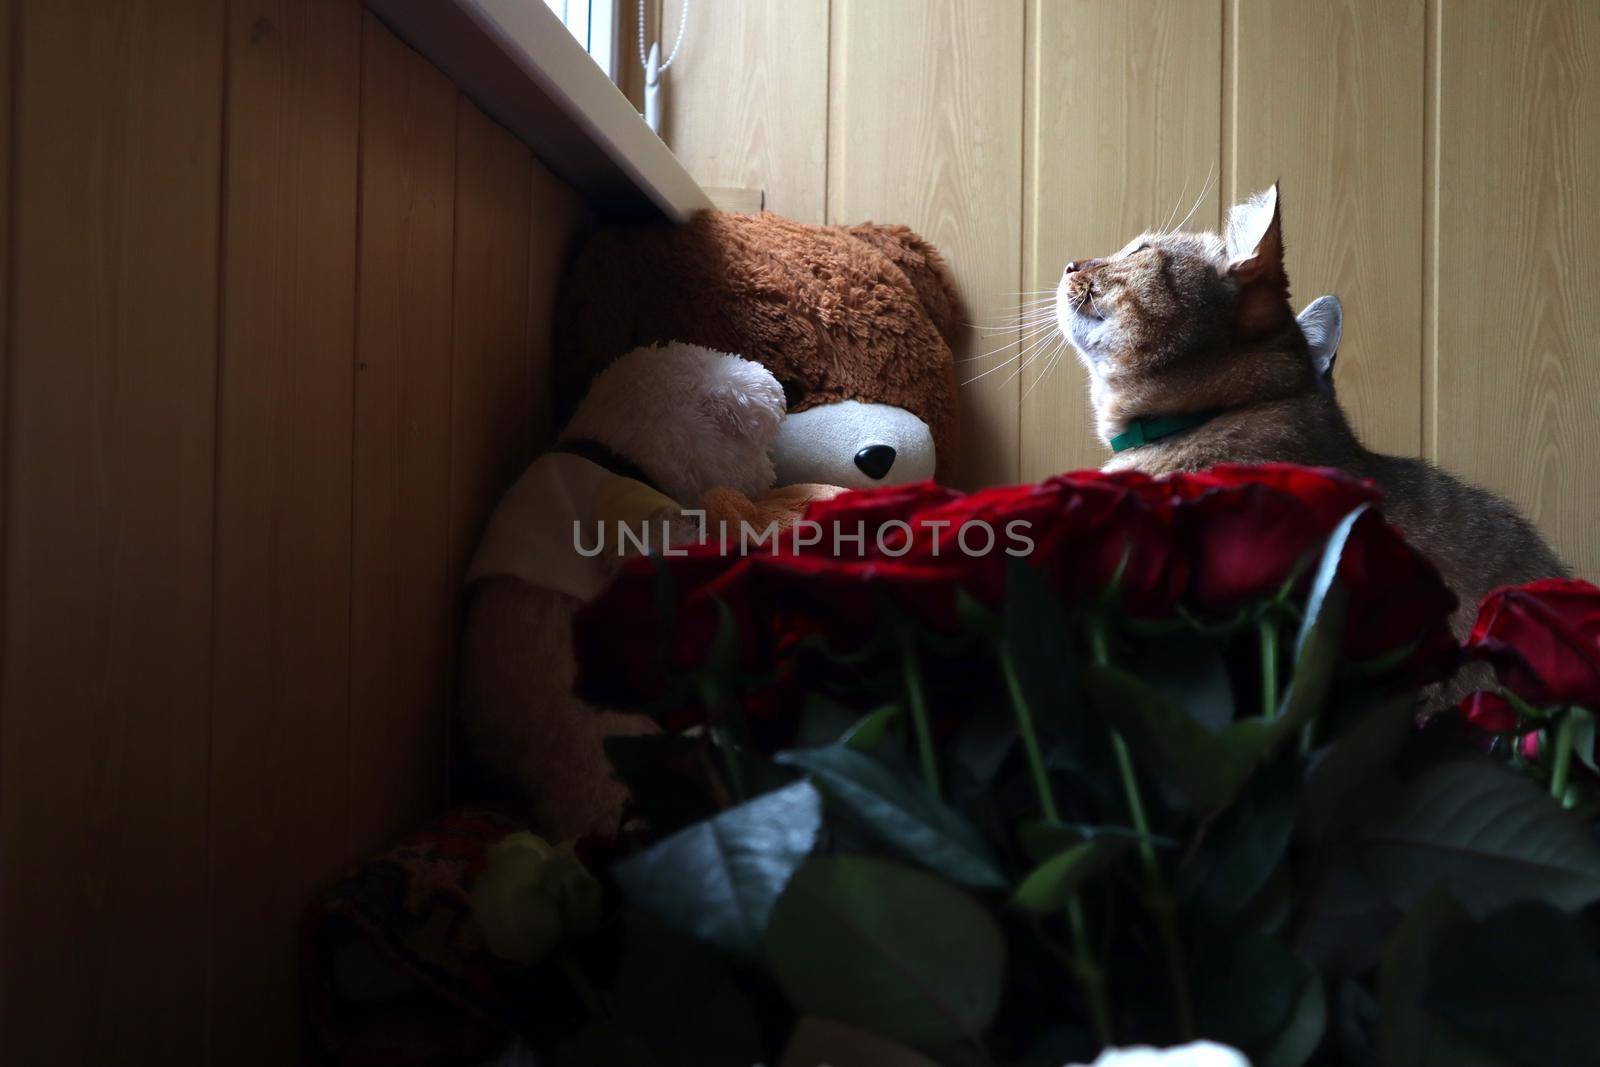 A cat sits on a sofa and looks out the window in the foreground of a red rose